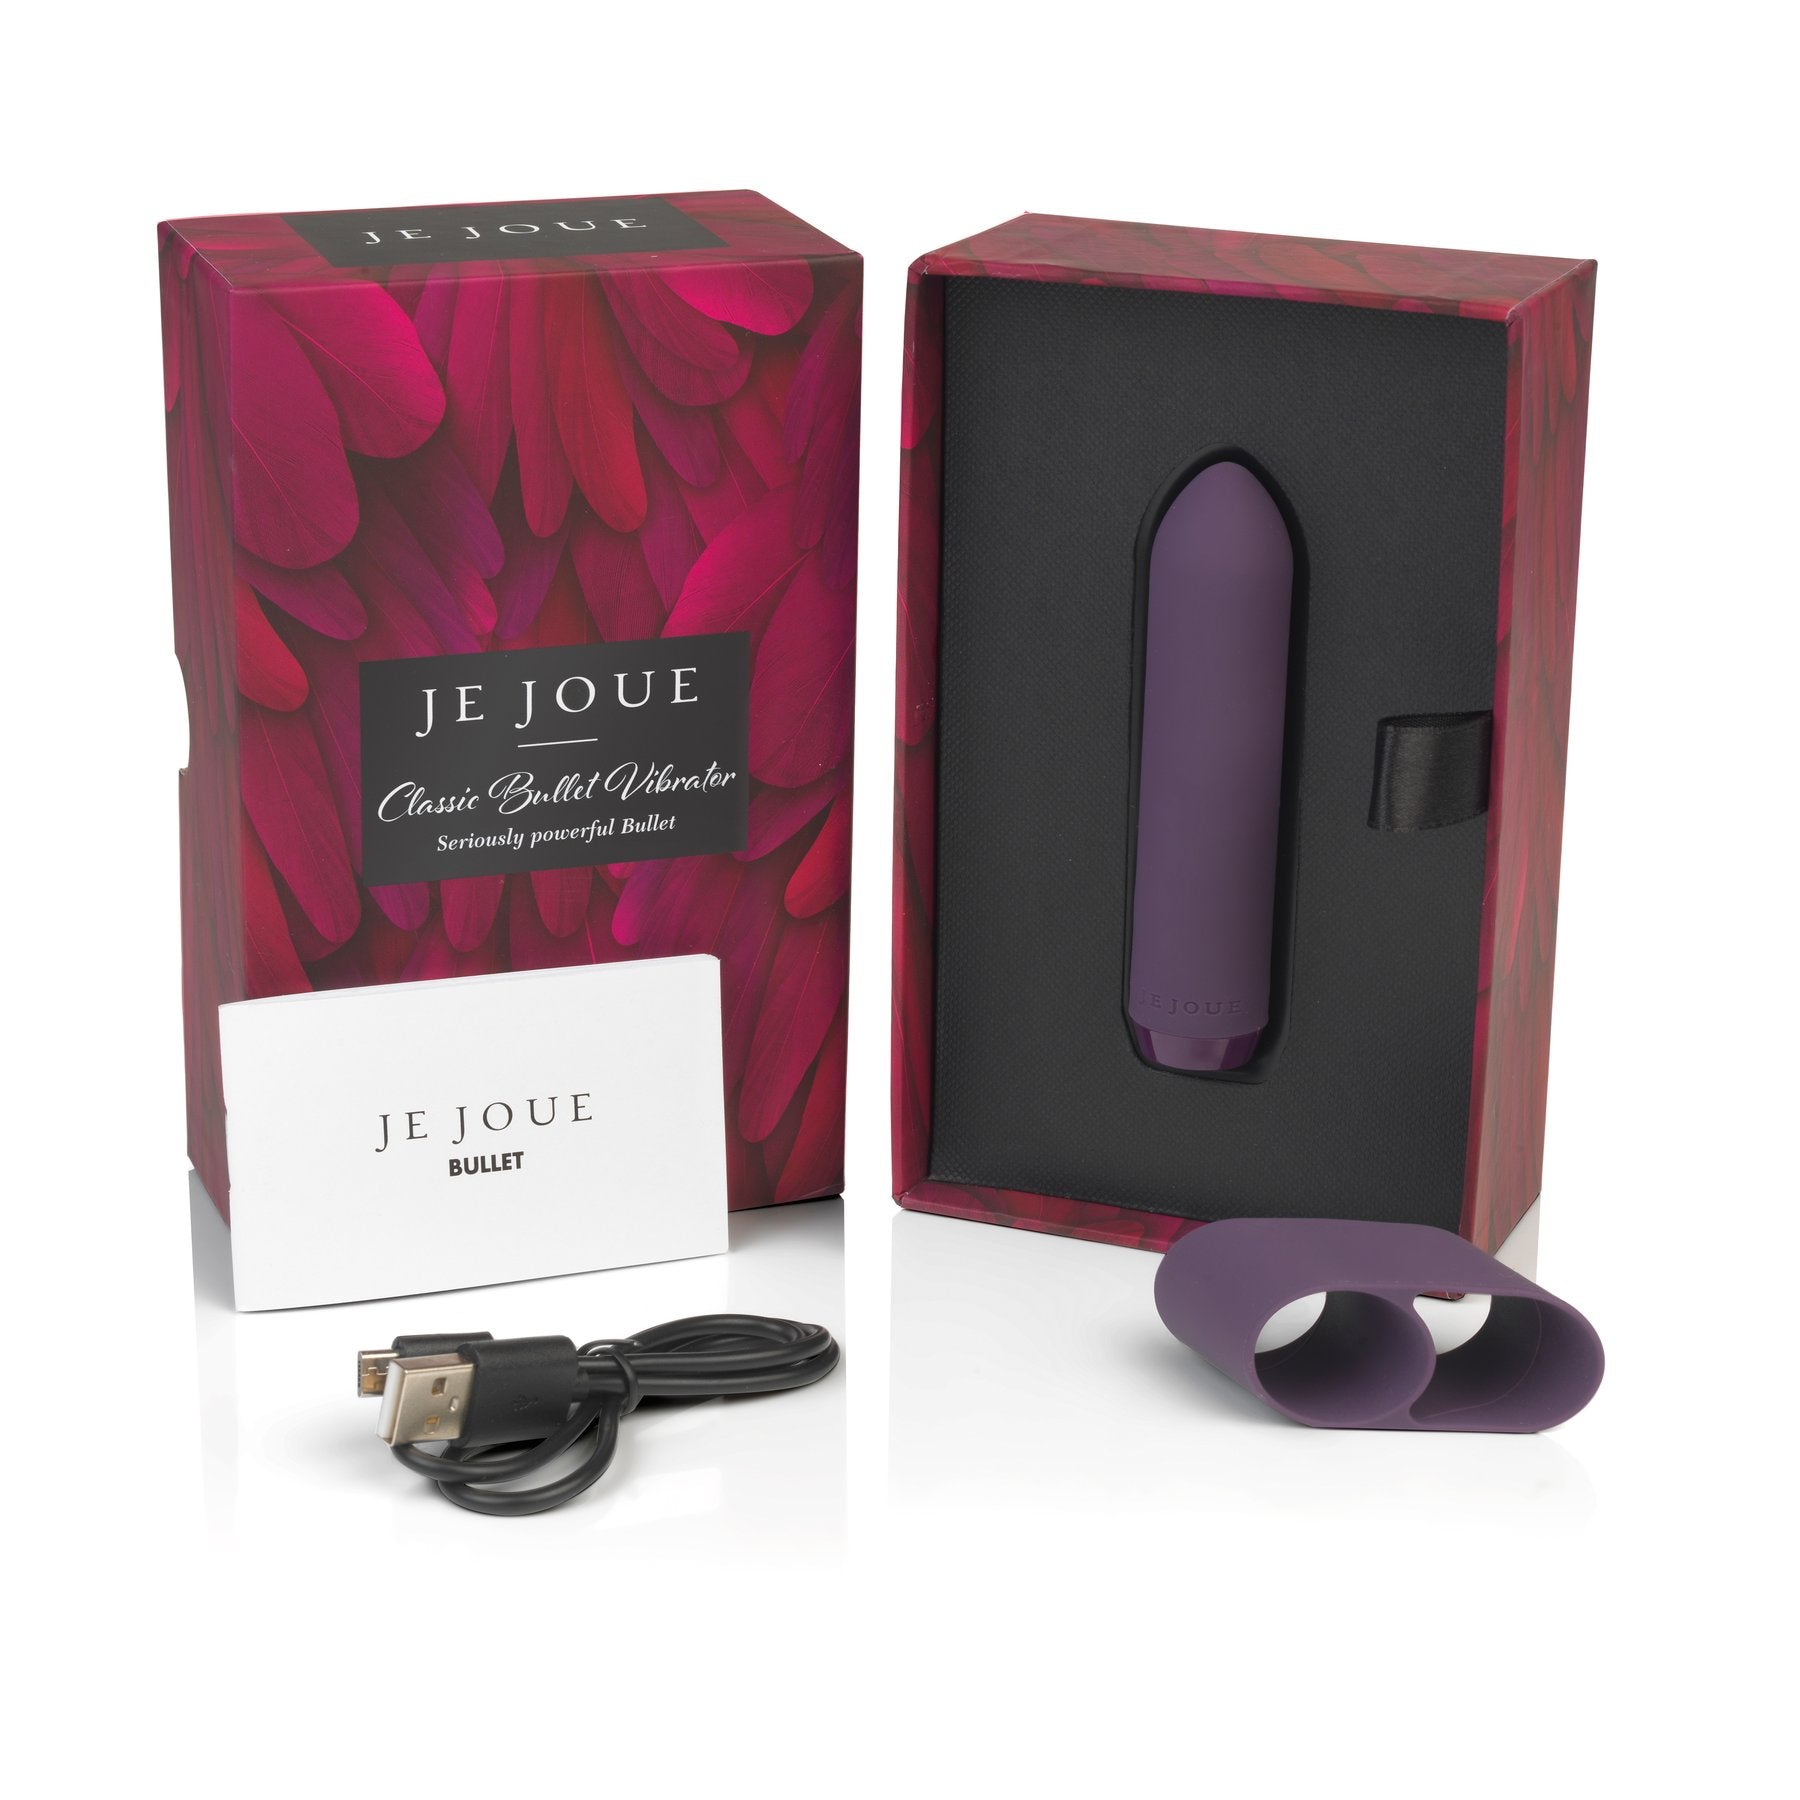 Je Joue Bullet Classic - Buy At Luxury Toy X - Free 3-Day Shipping